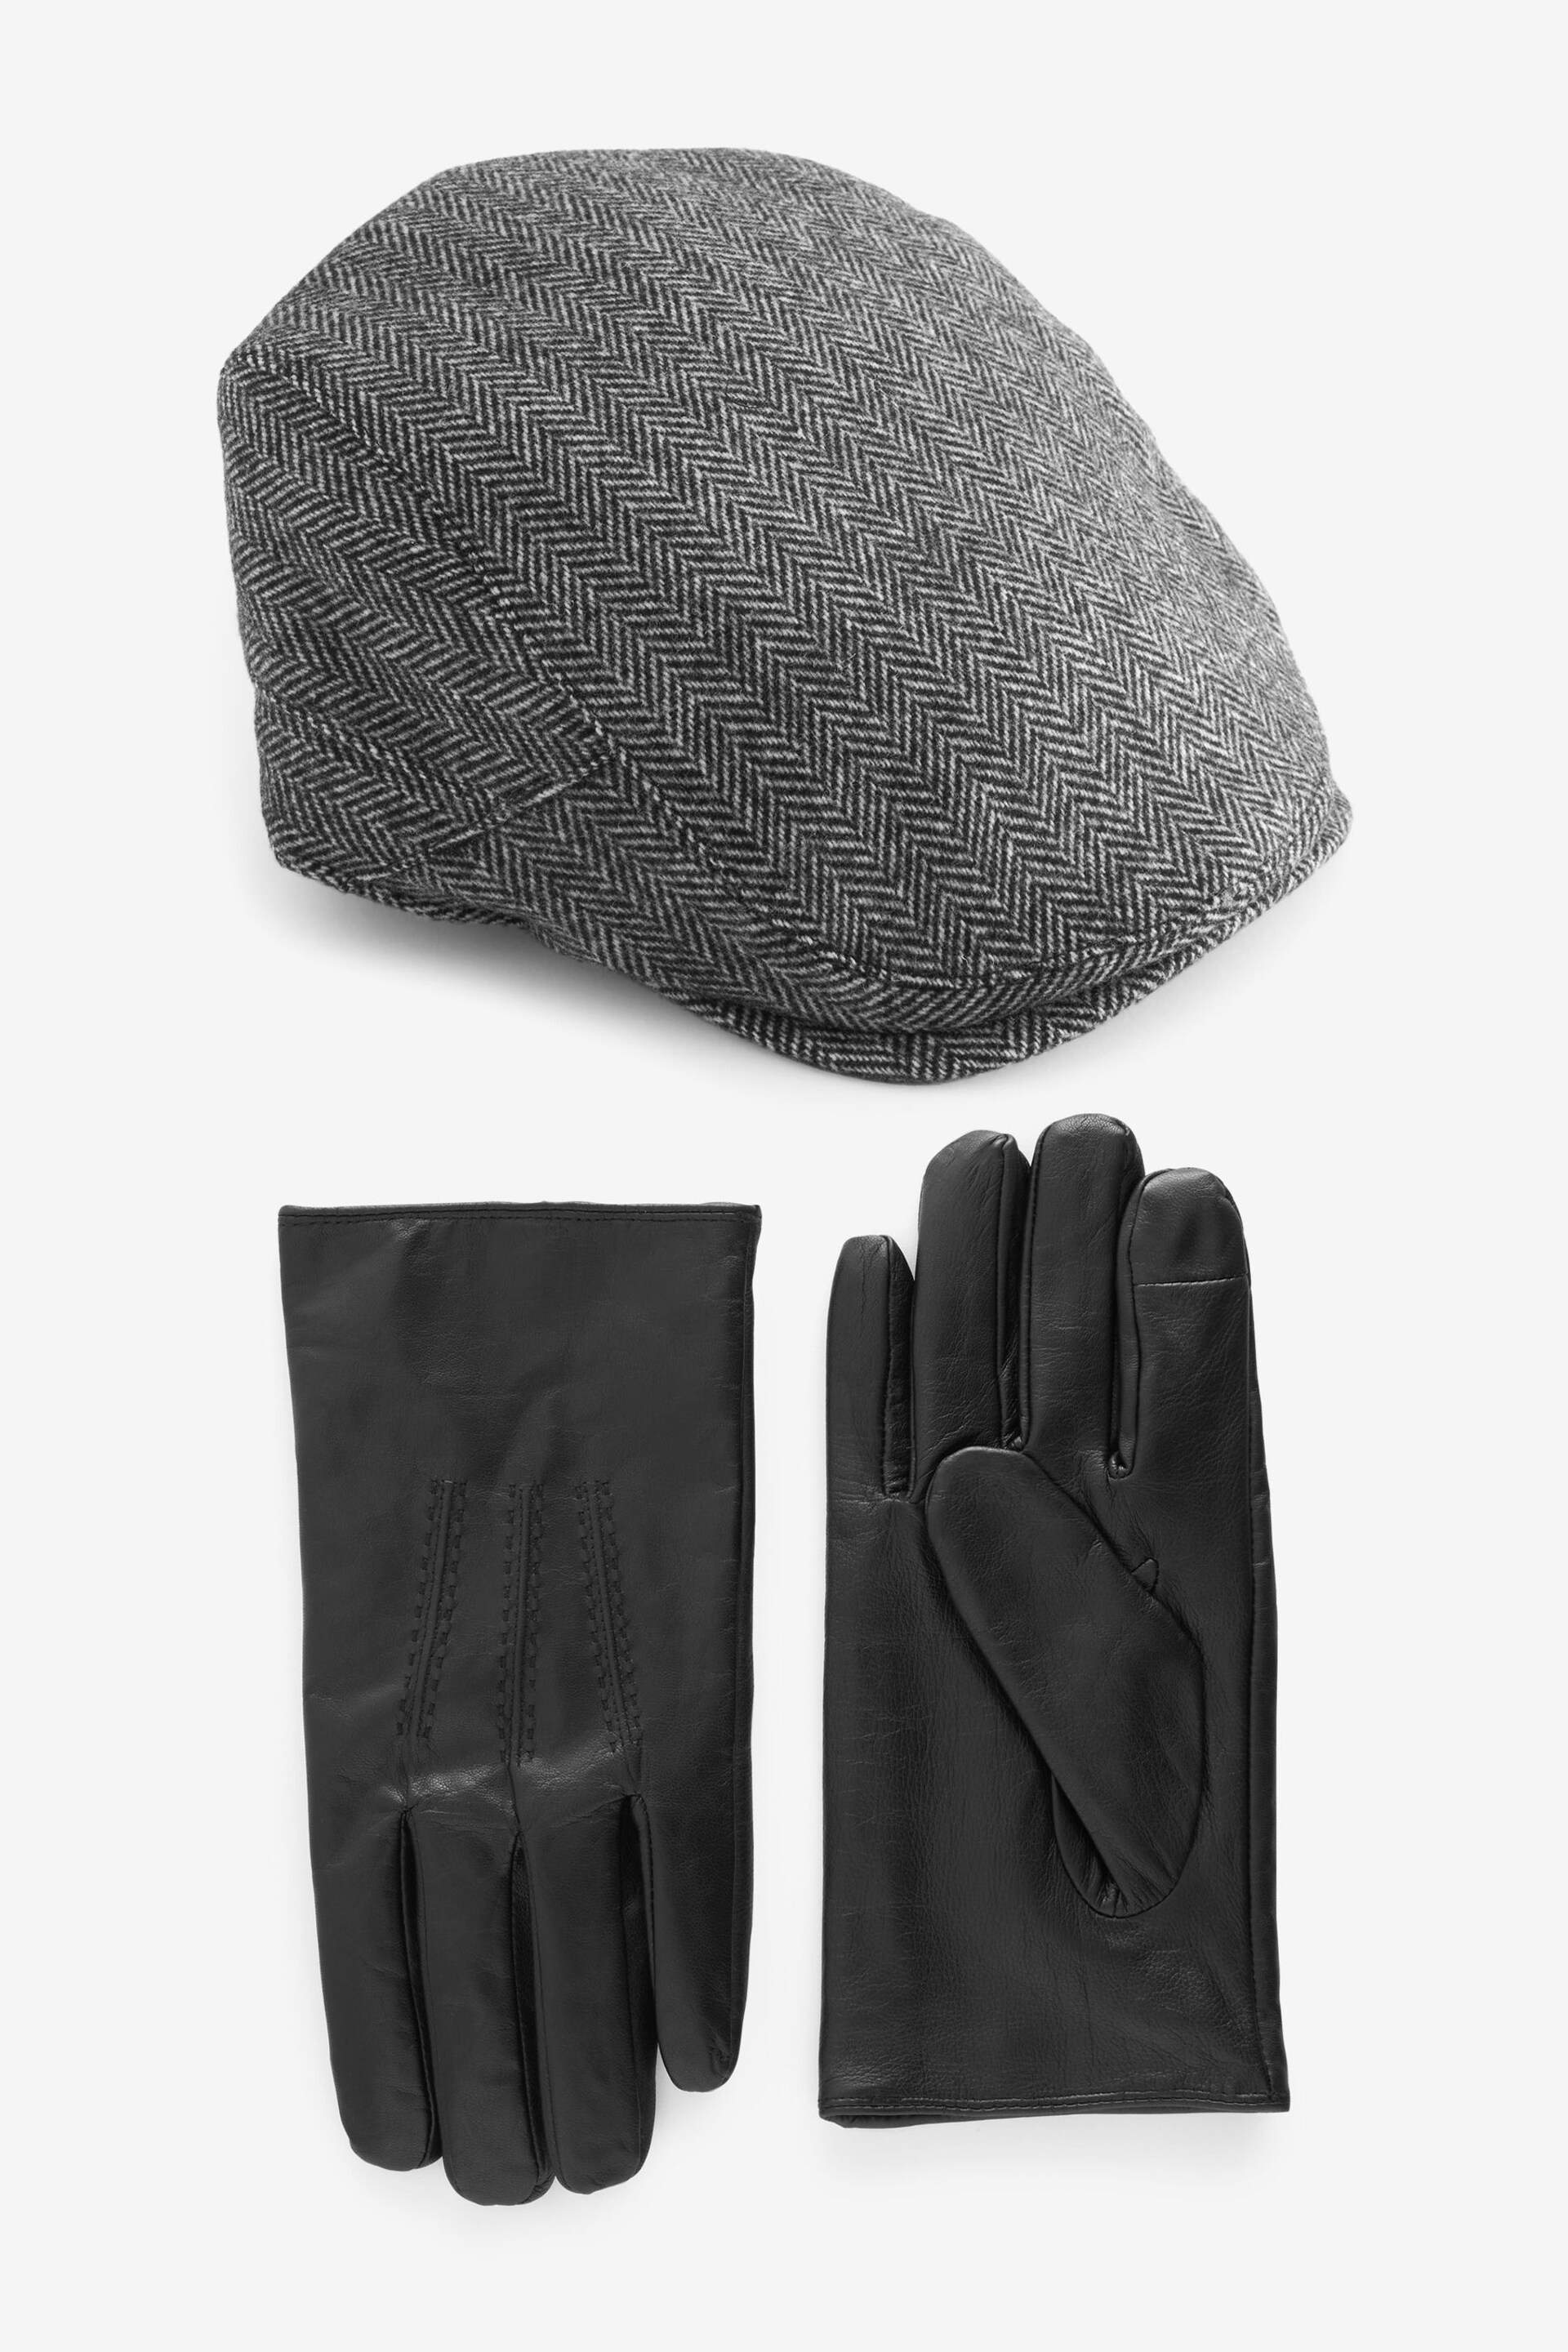 Grey/Black Texture Flatcap and Leather Gloves Set - Image 4 of 8